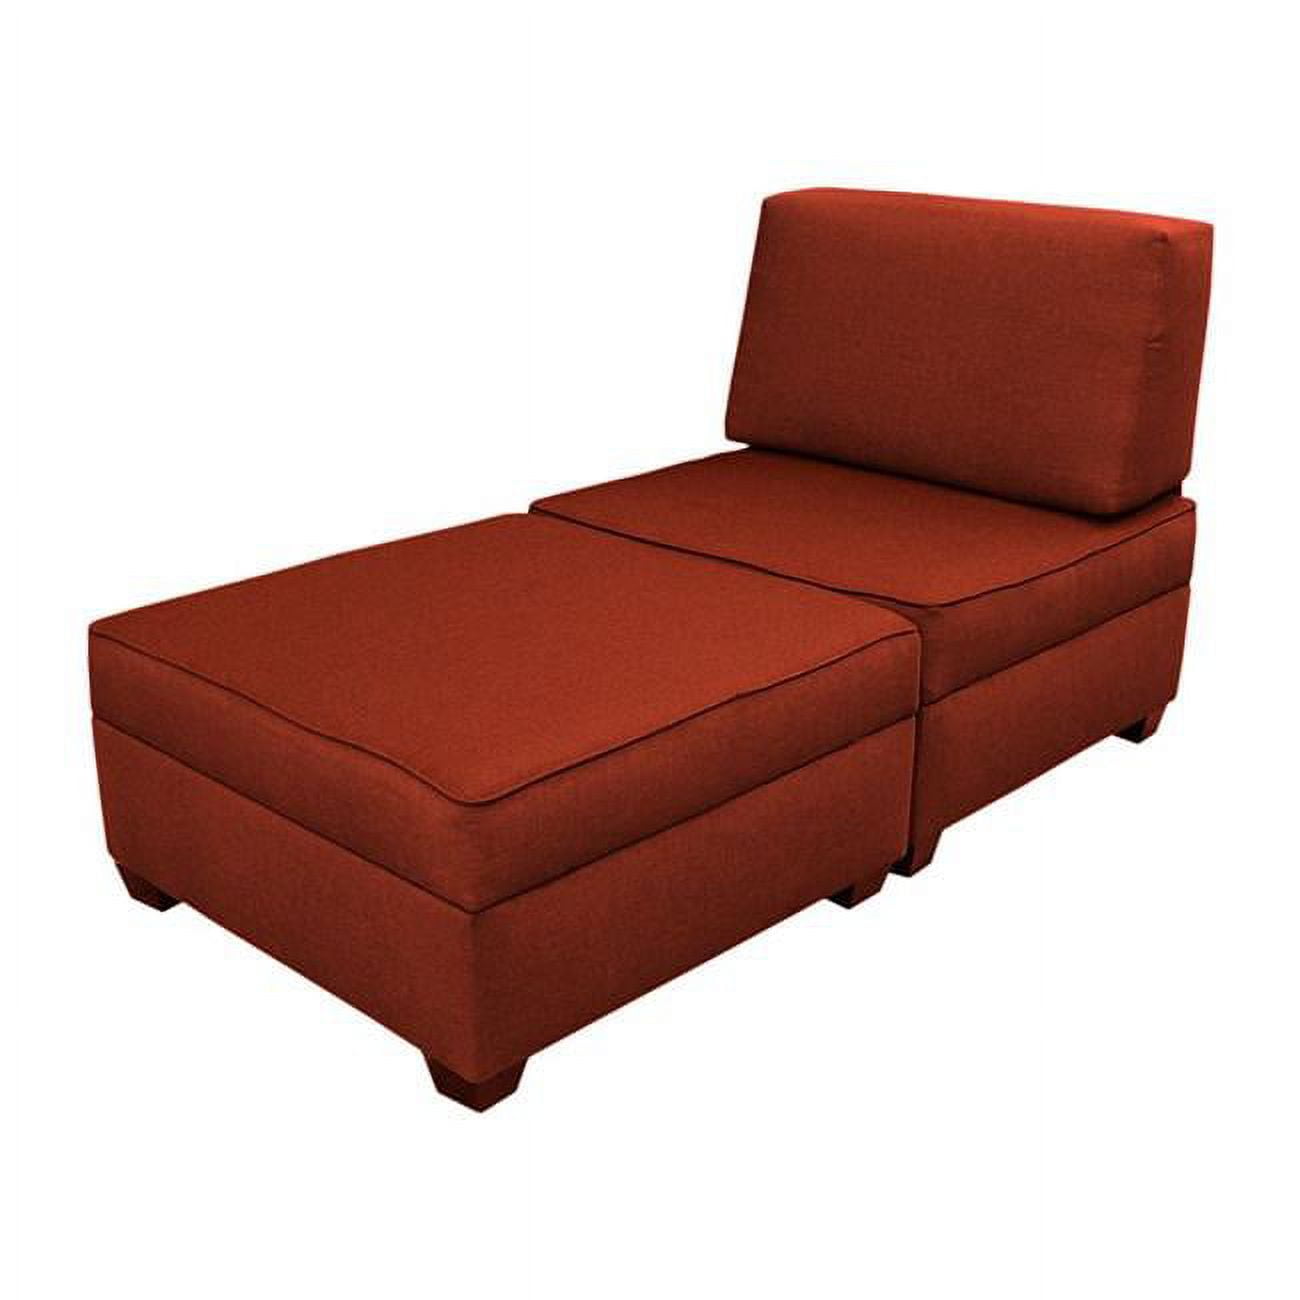 MFCL-TC 36 in. Chaise Lounge Plus 1 Storage Ottomans - Brick -  Duobed